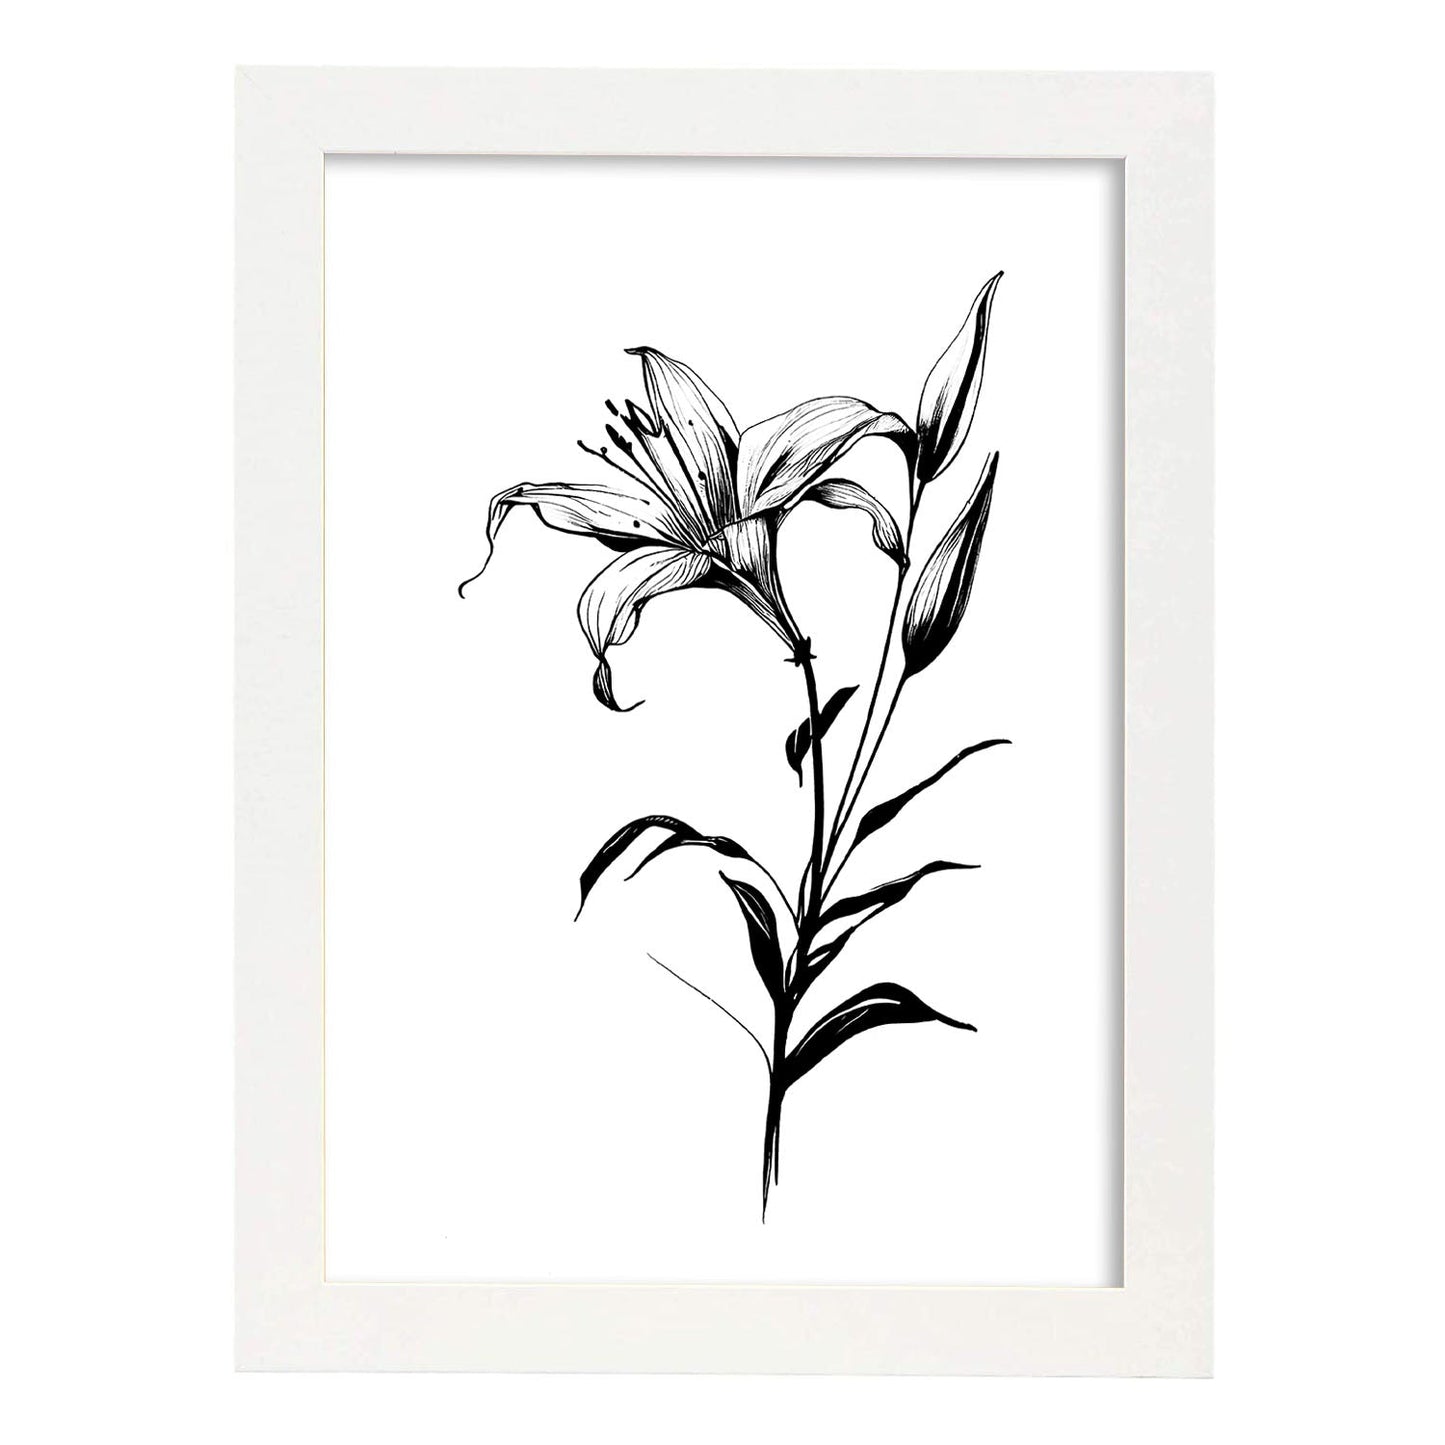 Nacnic Lily Minimalist Line Art_2. Aesthetic Wall Art Prints for Bedroom or Living Room Design.